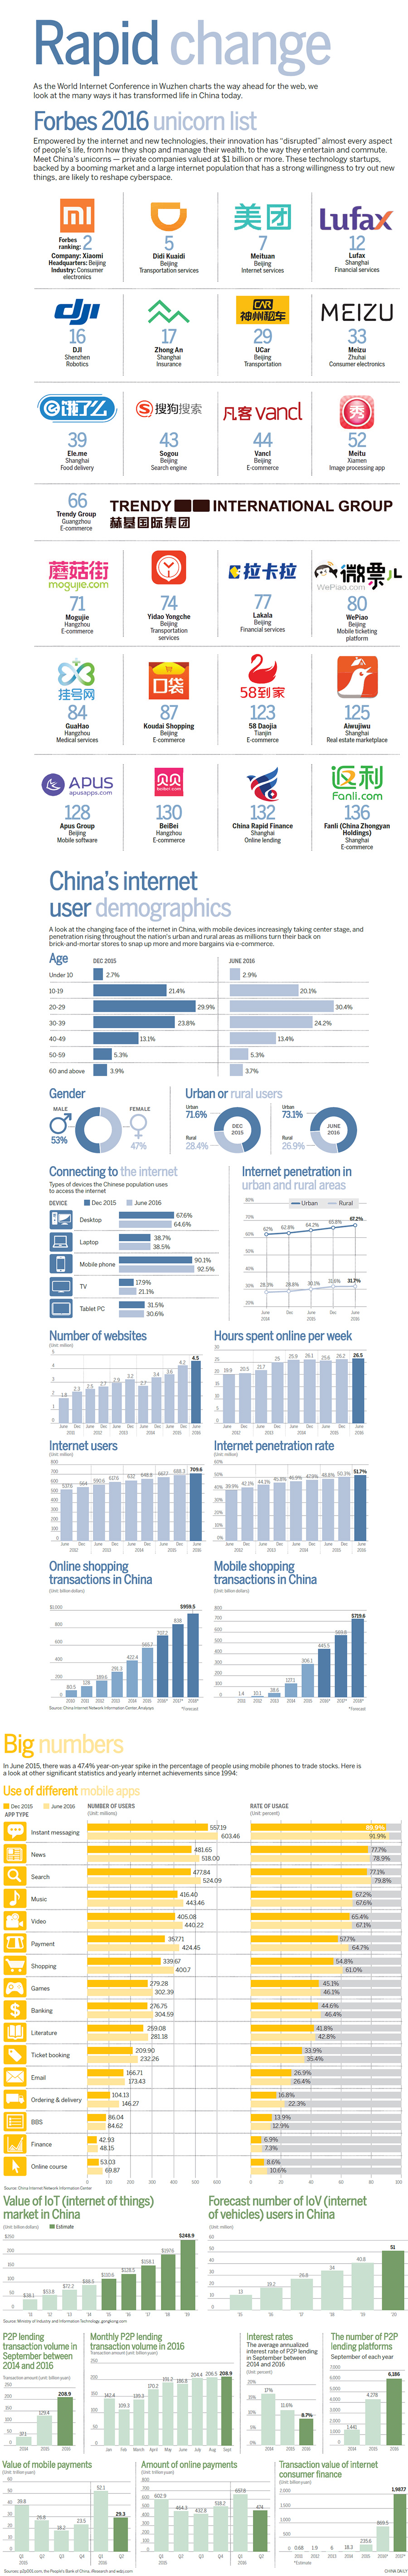 Infographic: How internet has transformed China